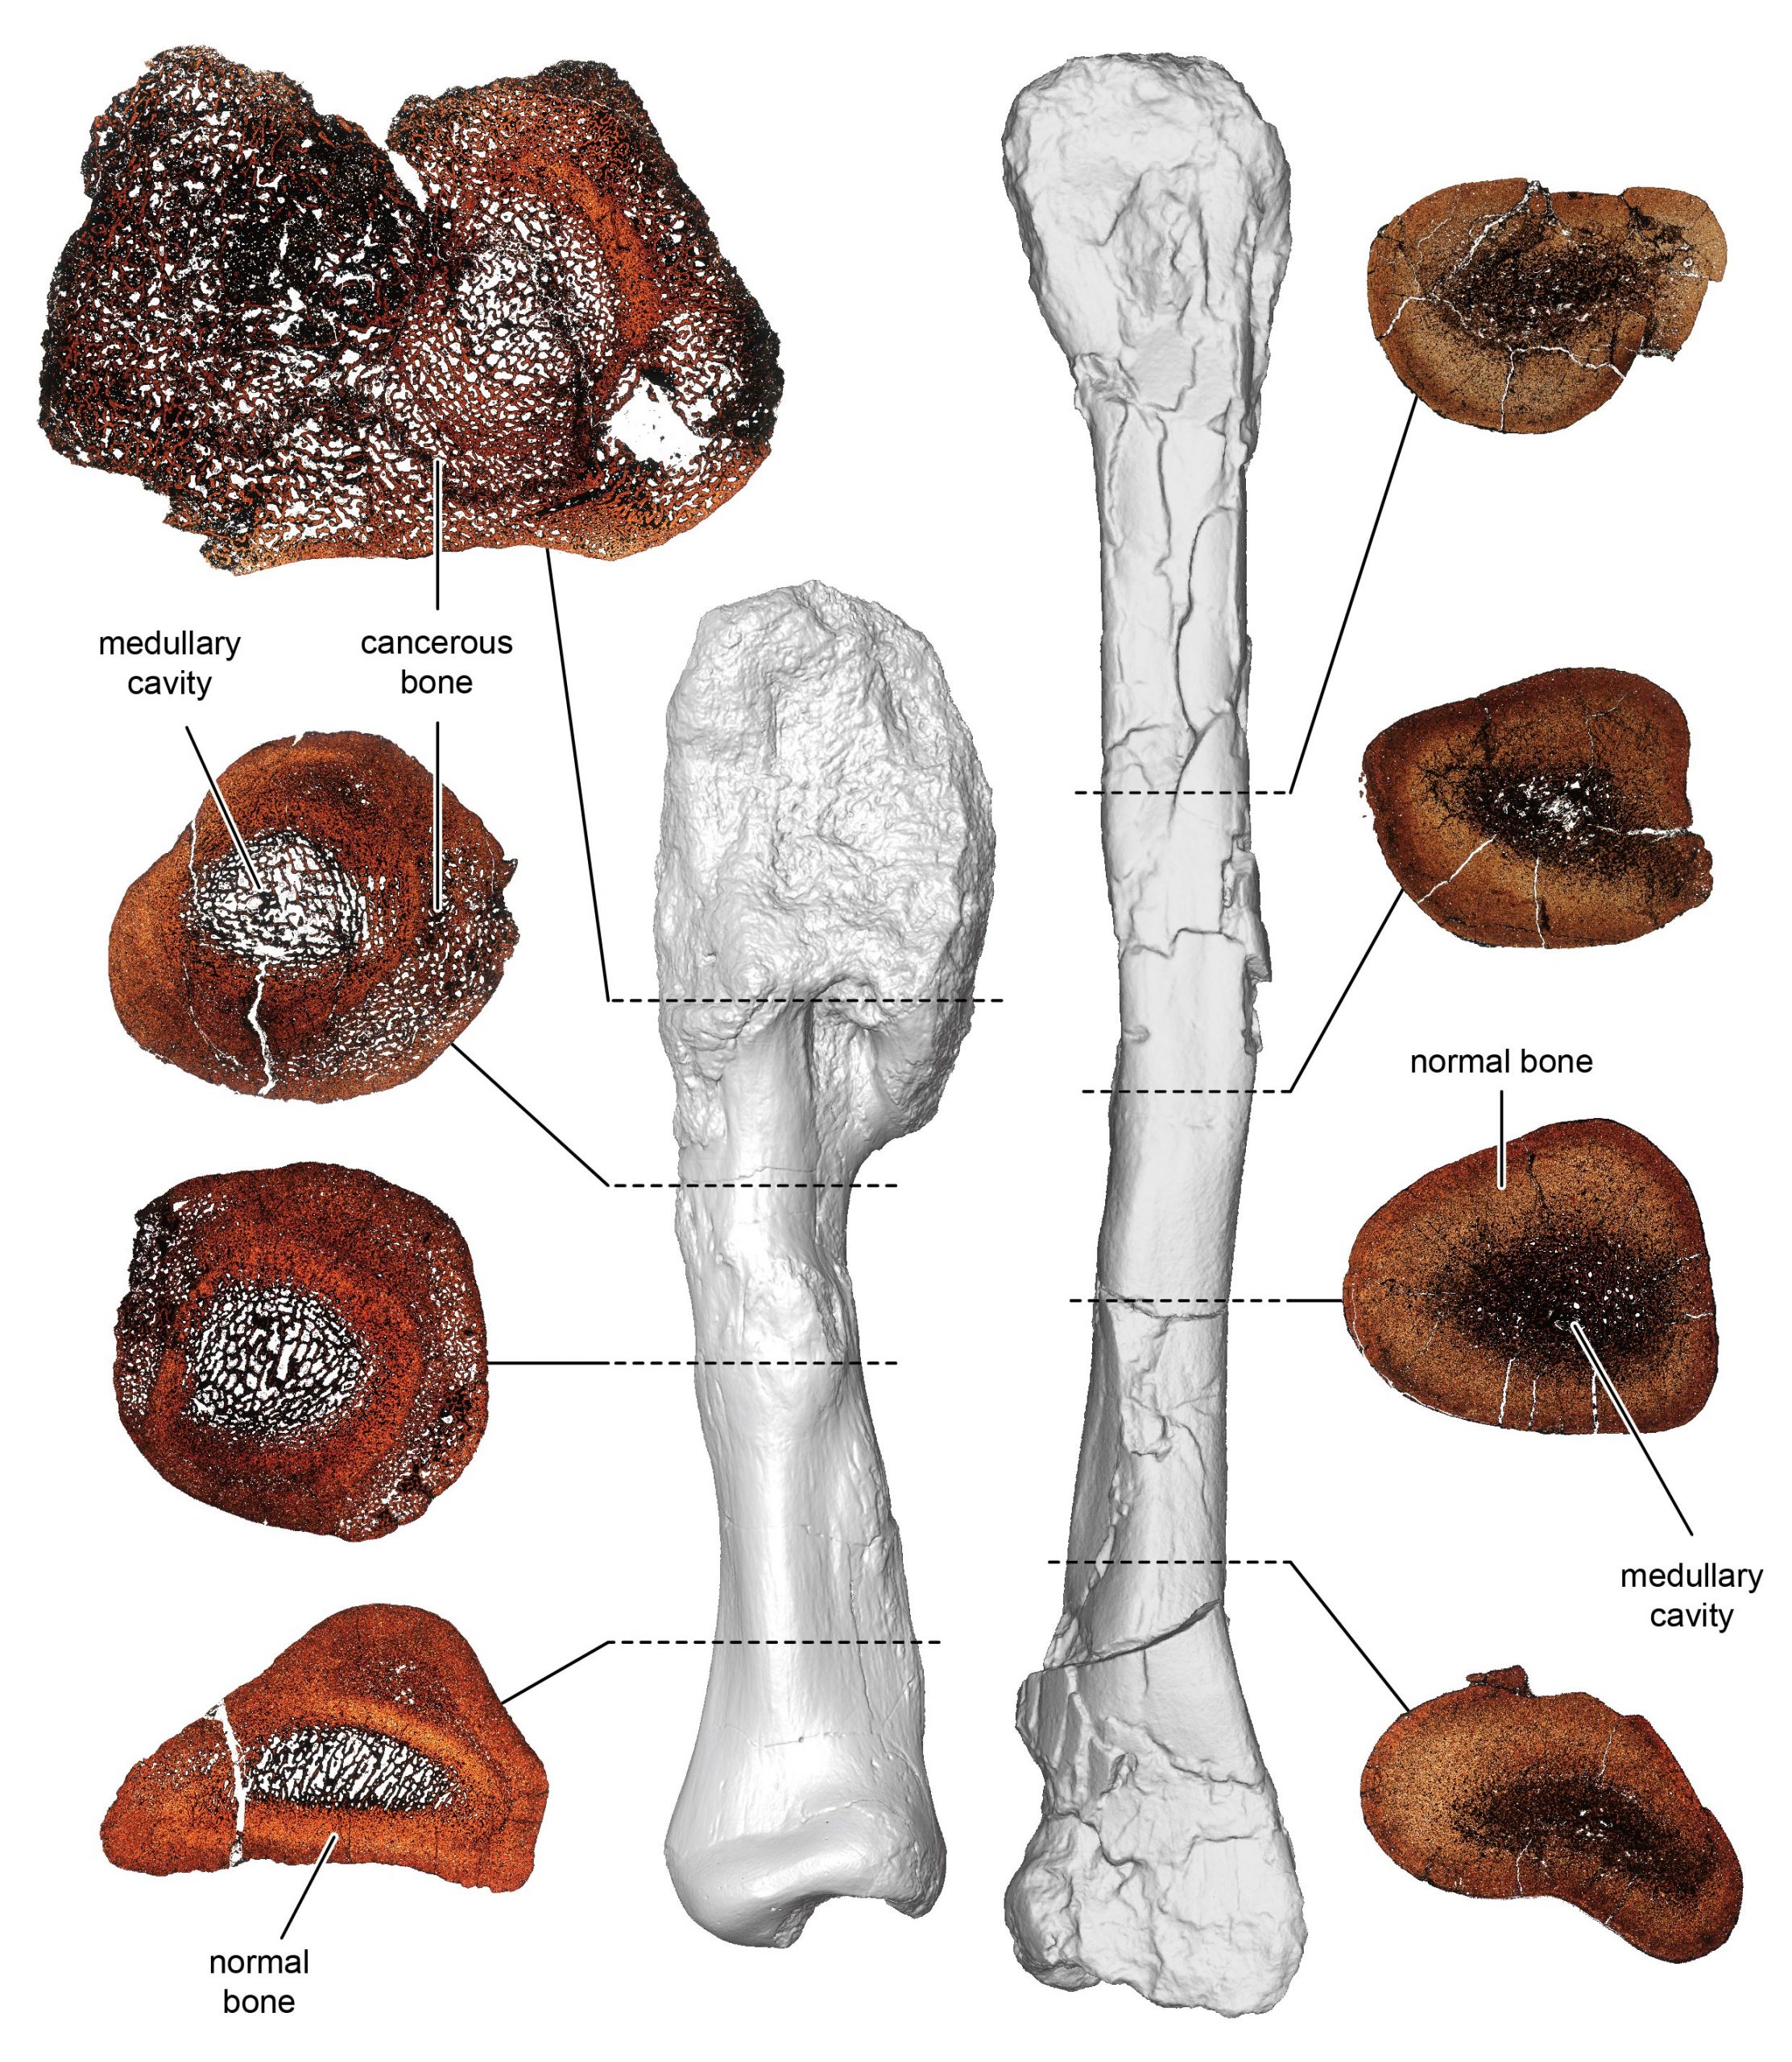 Dinosaur Diagnosed With Malignant Cancer for the First Time â€“ Cancerous Bone From 77 Million Years Ago - SciTechDaily